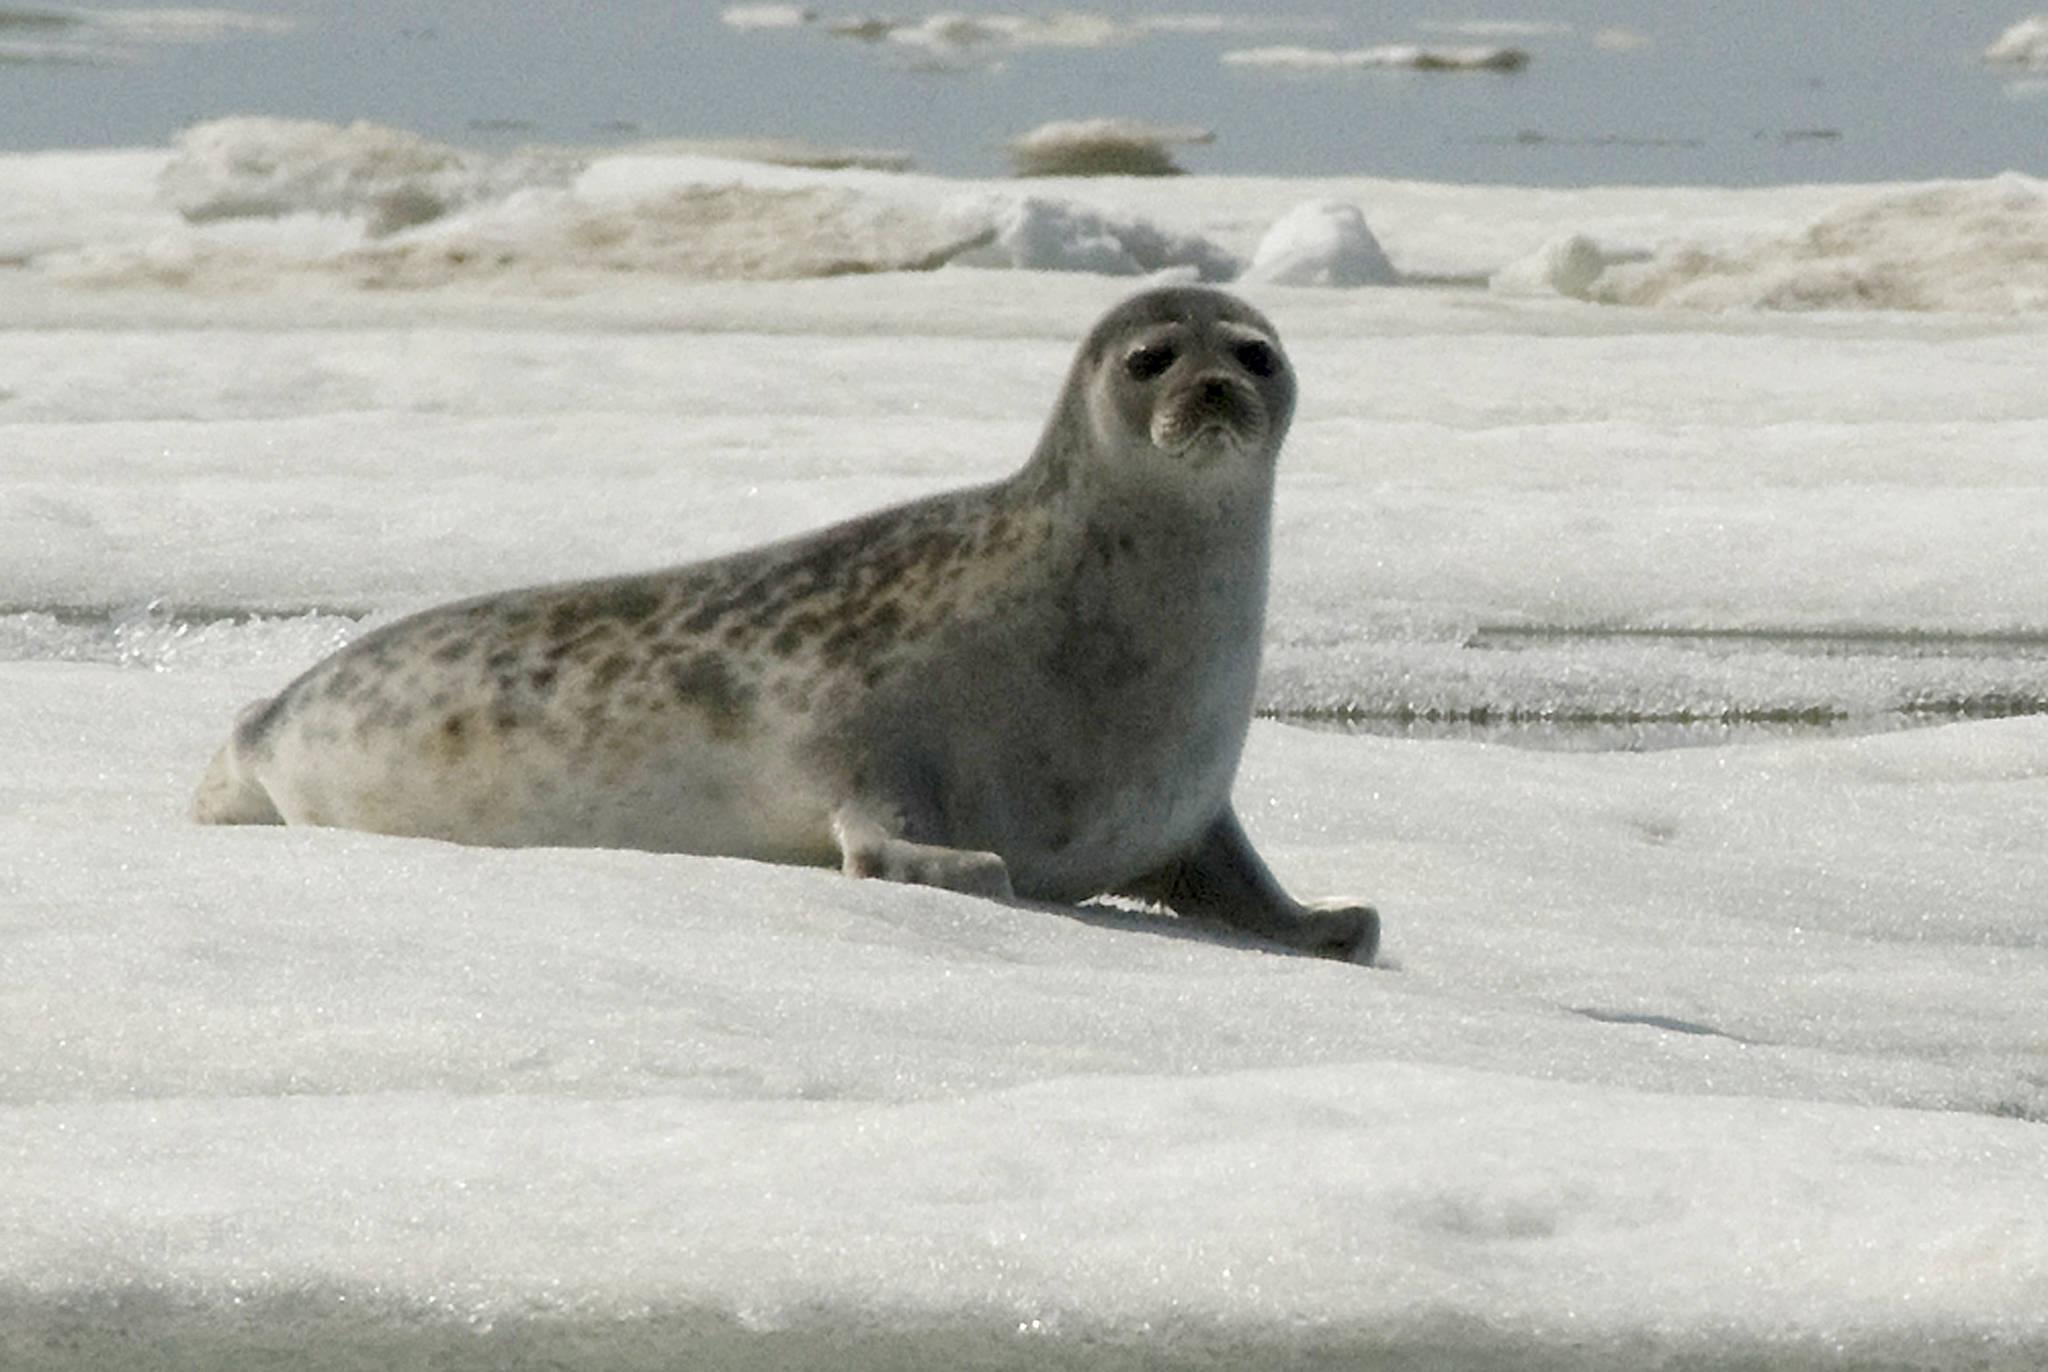 This June 5, 2009 file photo released by National Oceanic and Atmospheric Administration shows an adult ringed seal in Kotzebue, Alaska. An environmental group is suing the federal government for failing to designate critical habitat for two ice seals on the threatened species list. The Center for Biological Diversity sued the National Marine Fisheries Service on Thursday, June 13, 2019, for not designating critical habitat for ringed and bearded seals. (Mike Cameron/NOAA via AP, File)